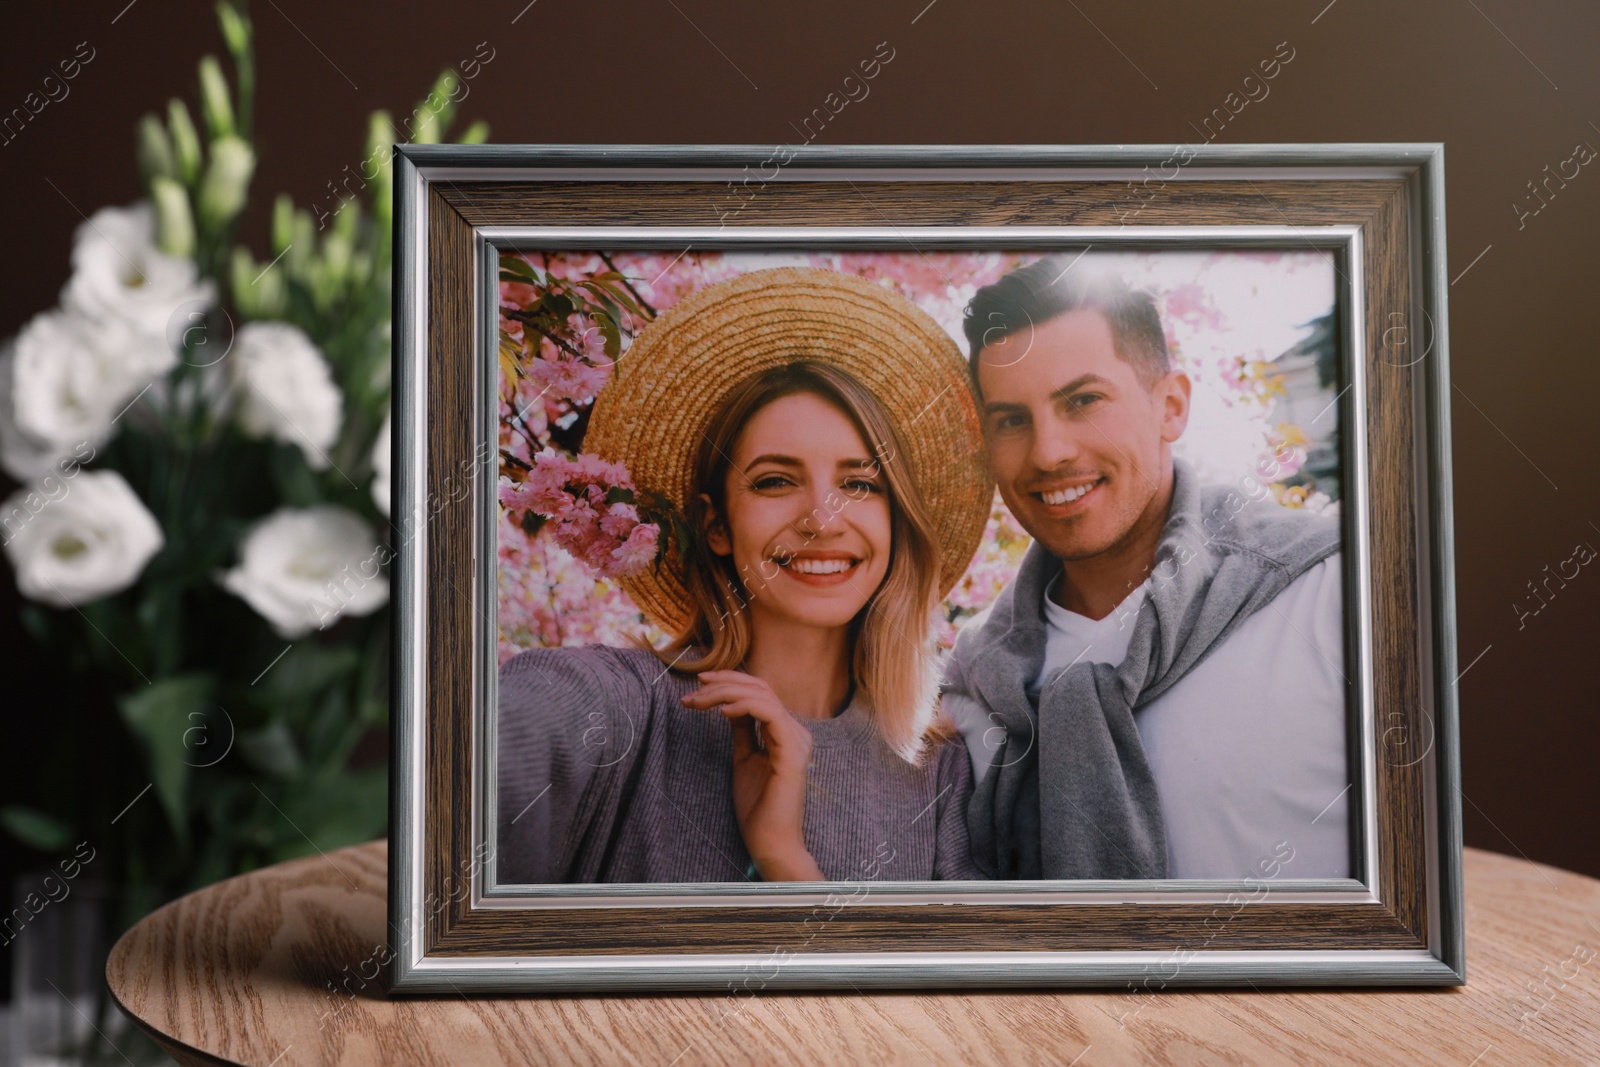 Photo of Framed photo of happy couple on wooden table indoors